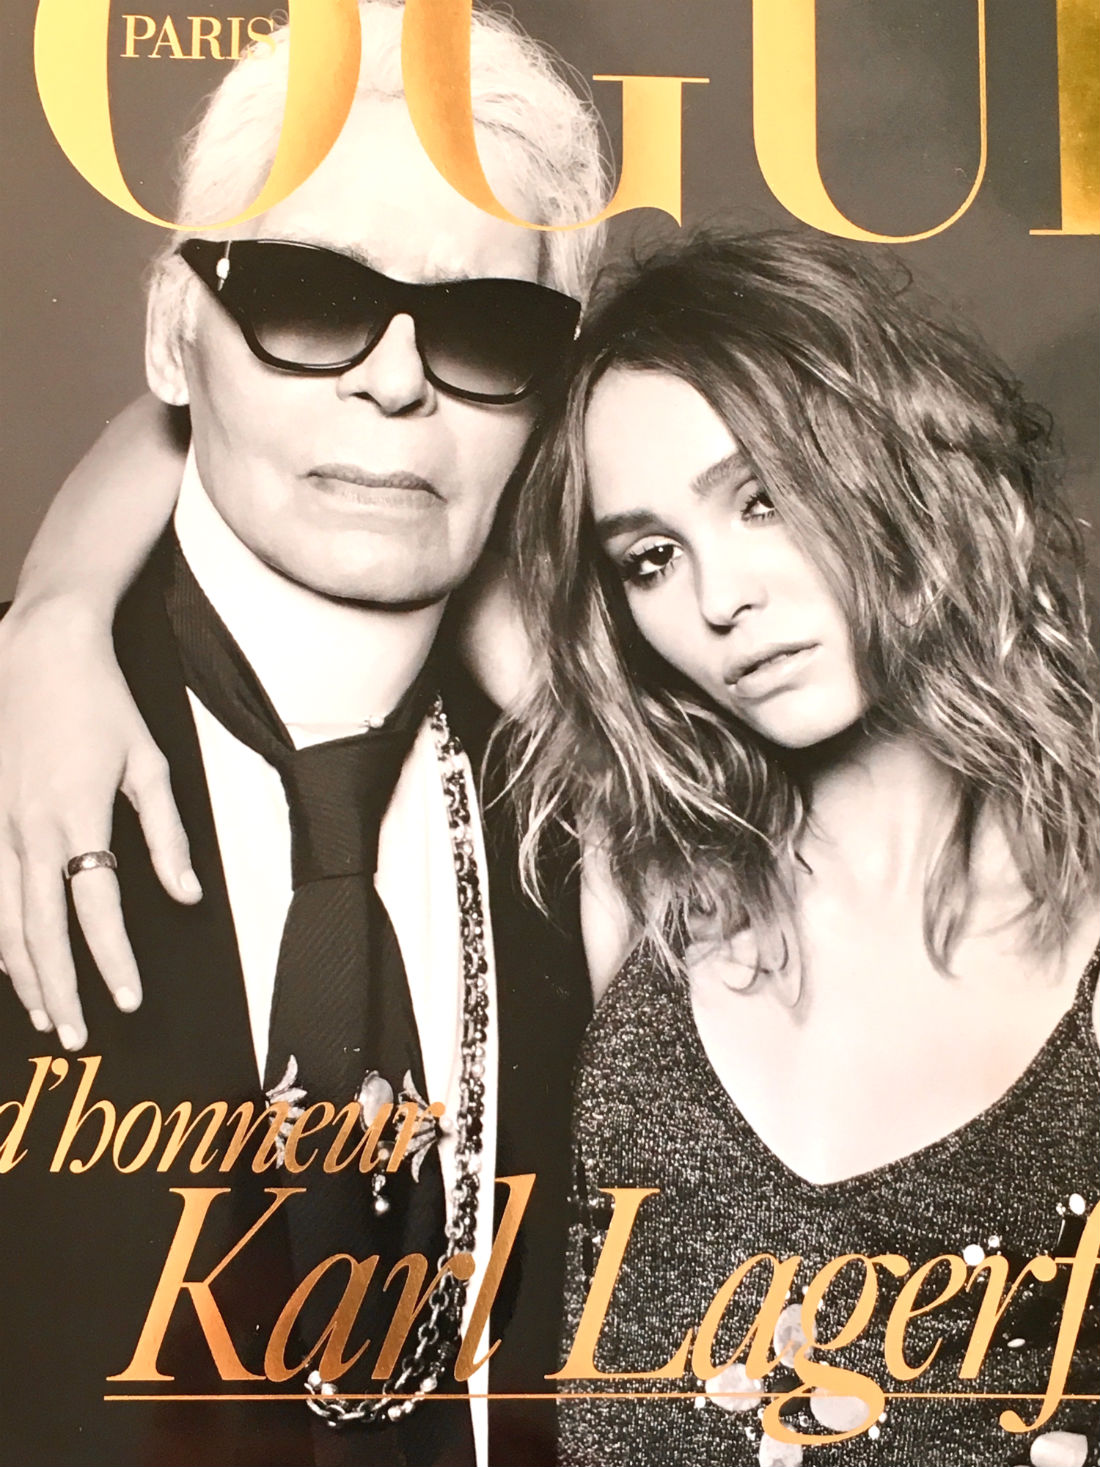 Cover of Vouge Paris with Karl Lagerfeld and Lily-Rose Depp. Verycamilla.